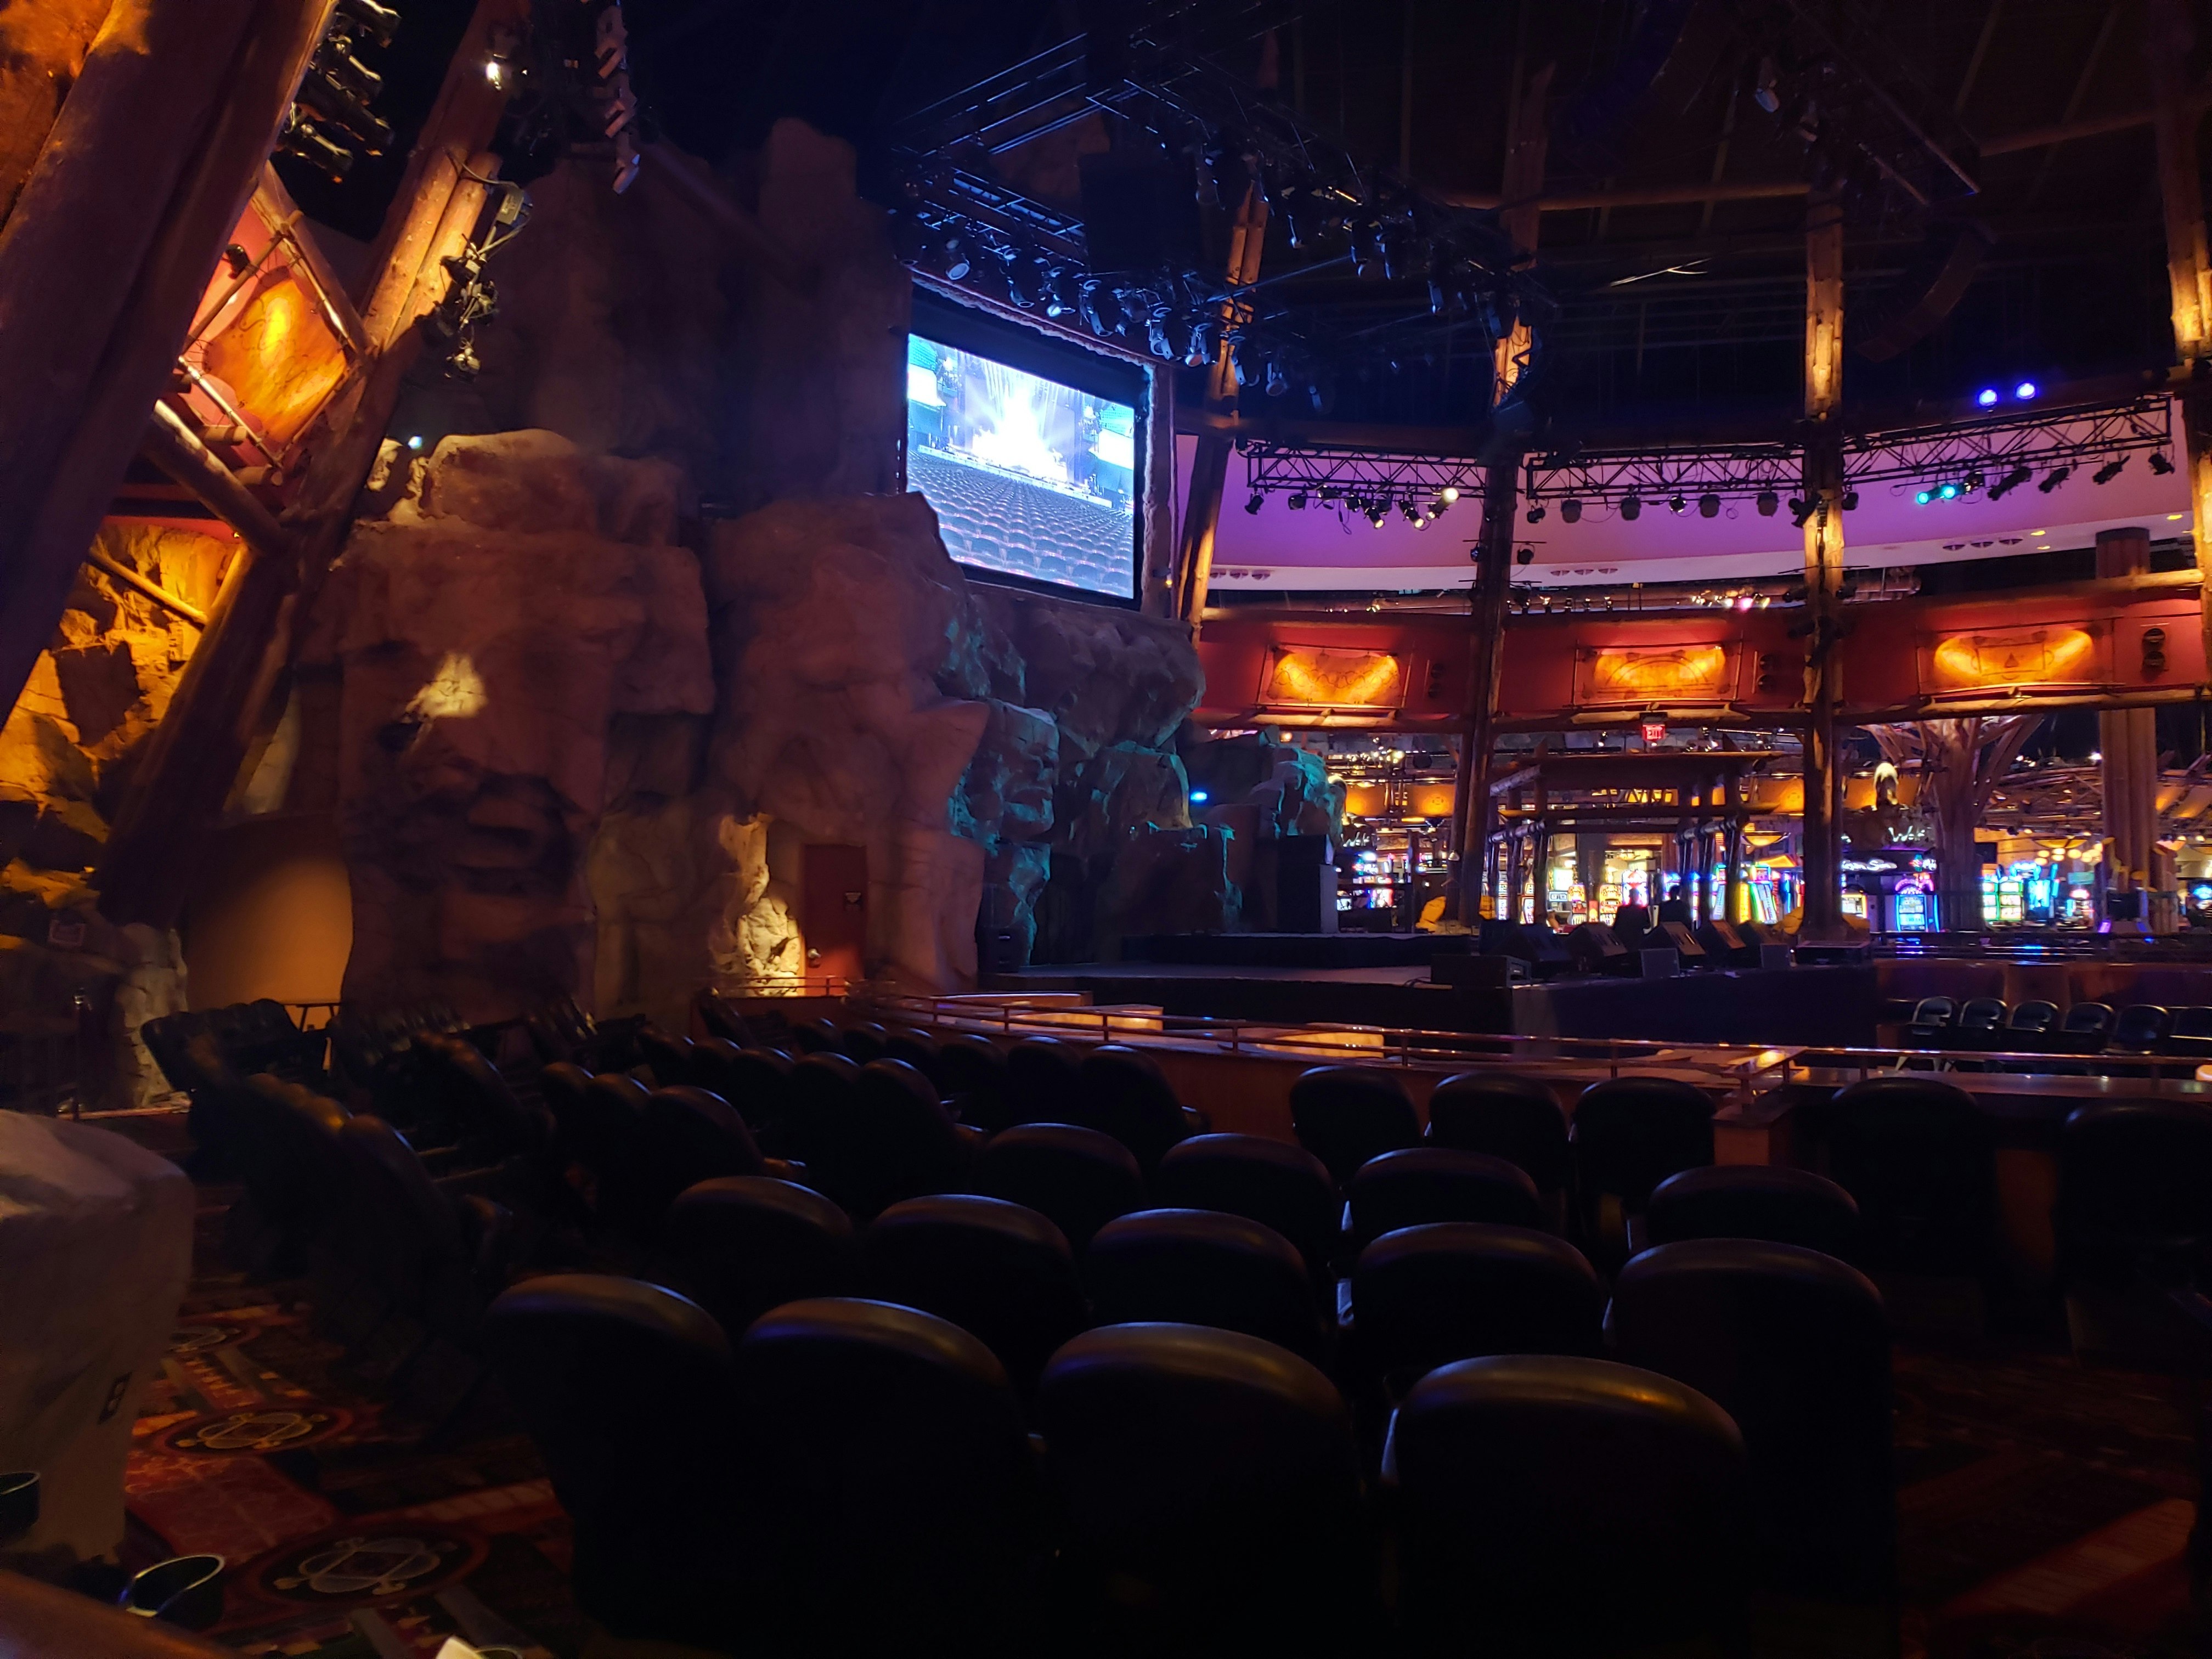 The Wolf Den at Mohegan Sun Casino has walls that look like giant boulders or a cave, with black vinyl seats with curved backrests in four rows in front of a large stage lit with purple and orange lights. A big flatscreen TV display over the stage is showing footage from another, larger amphitheater. 